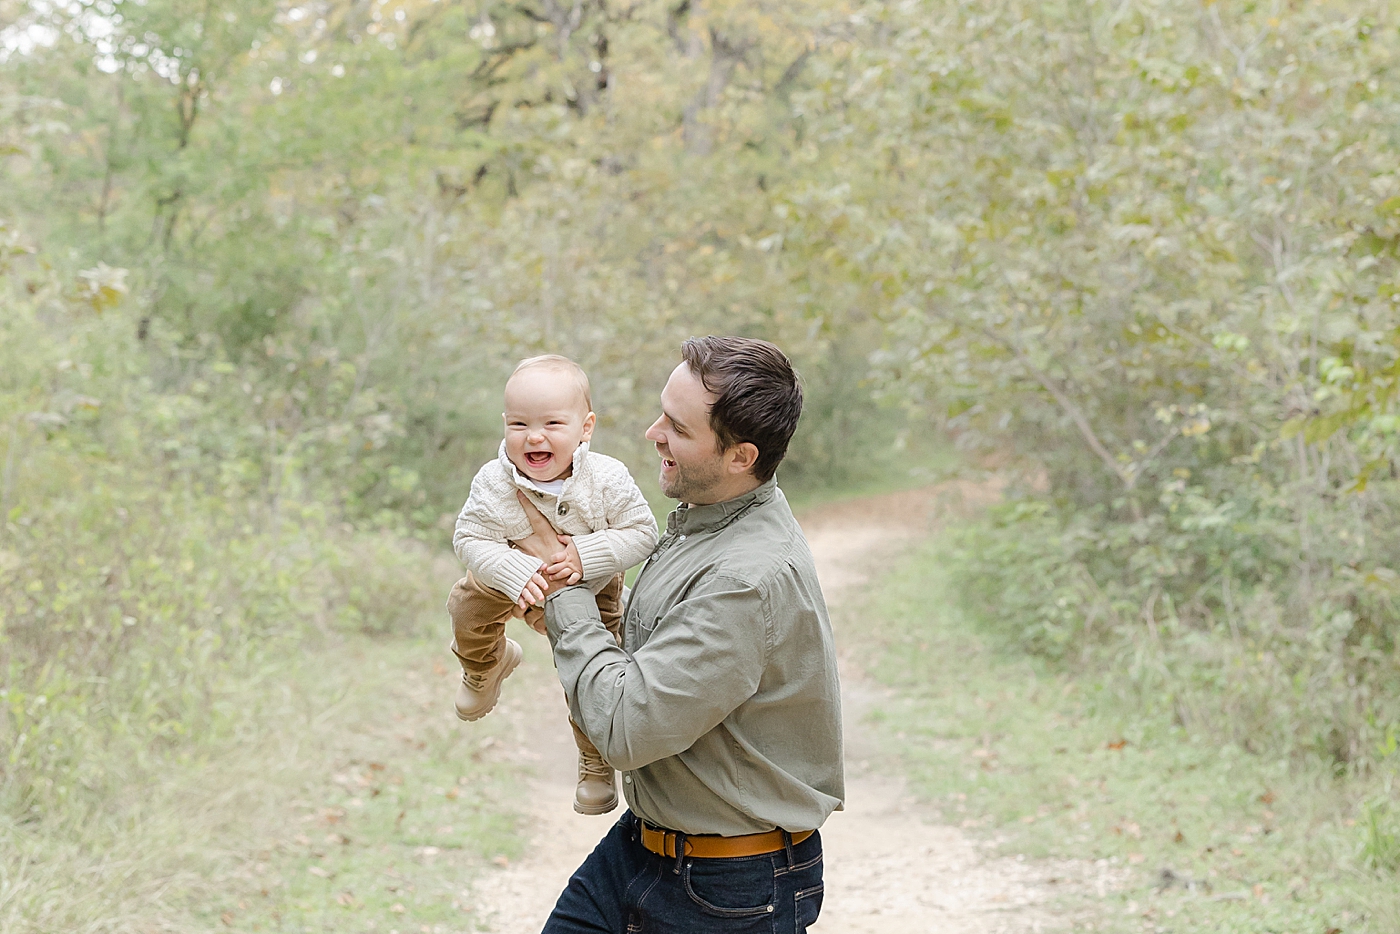 Dad playing with his baby boy | Image by Sana Ahmed Photography